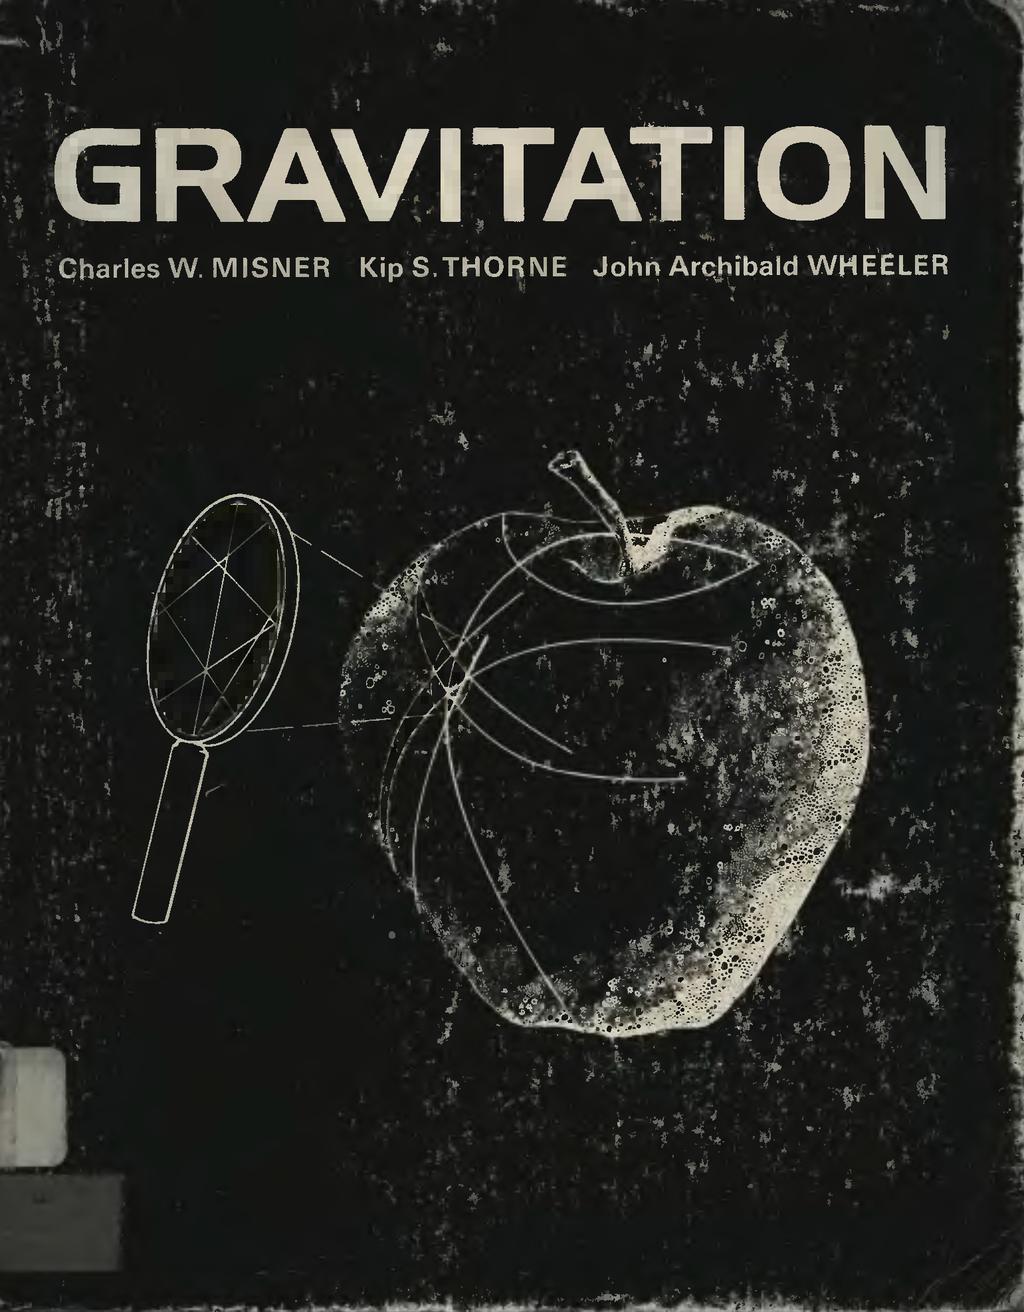 Weinberg Gravitation and Cosmology, John Wiley&Sons 197